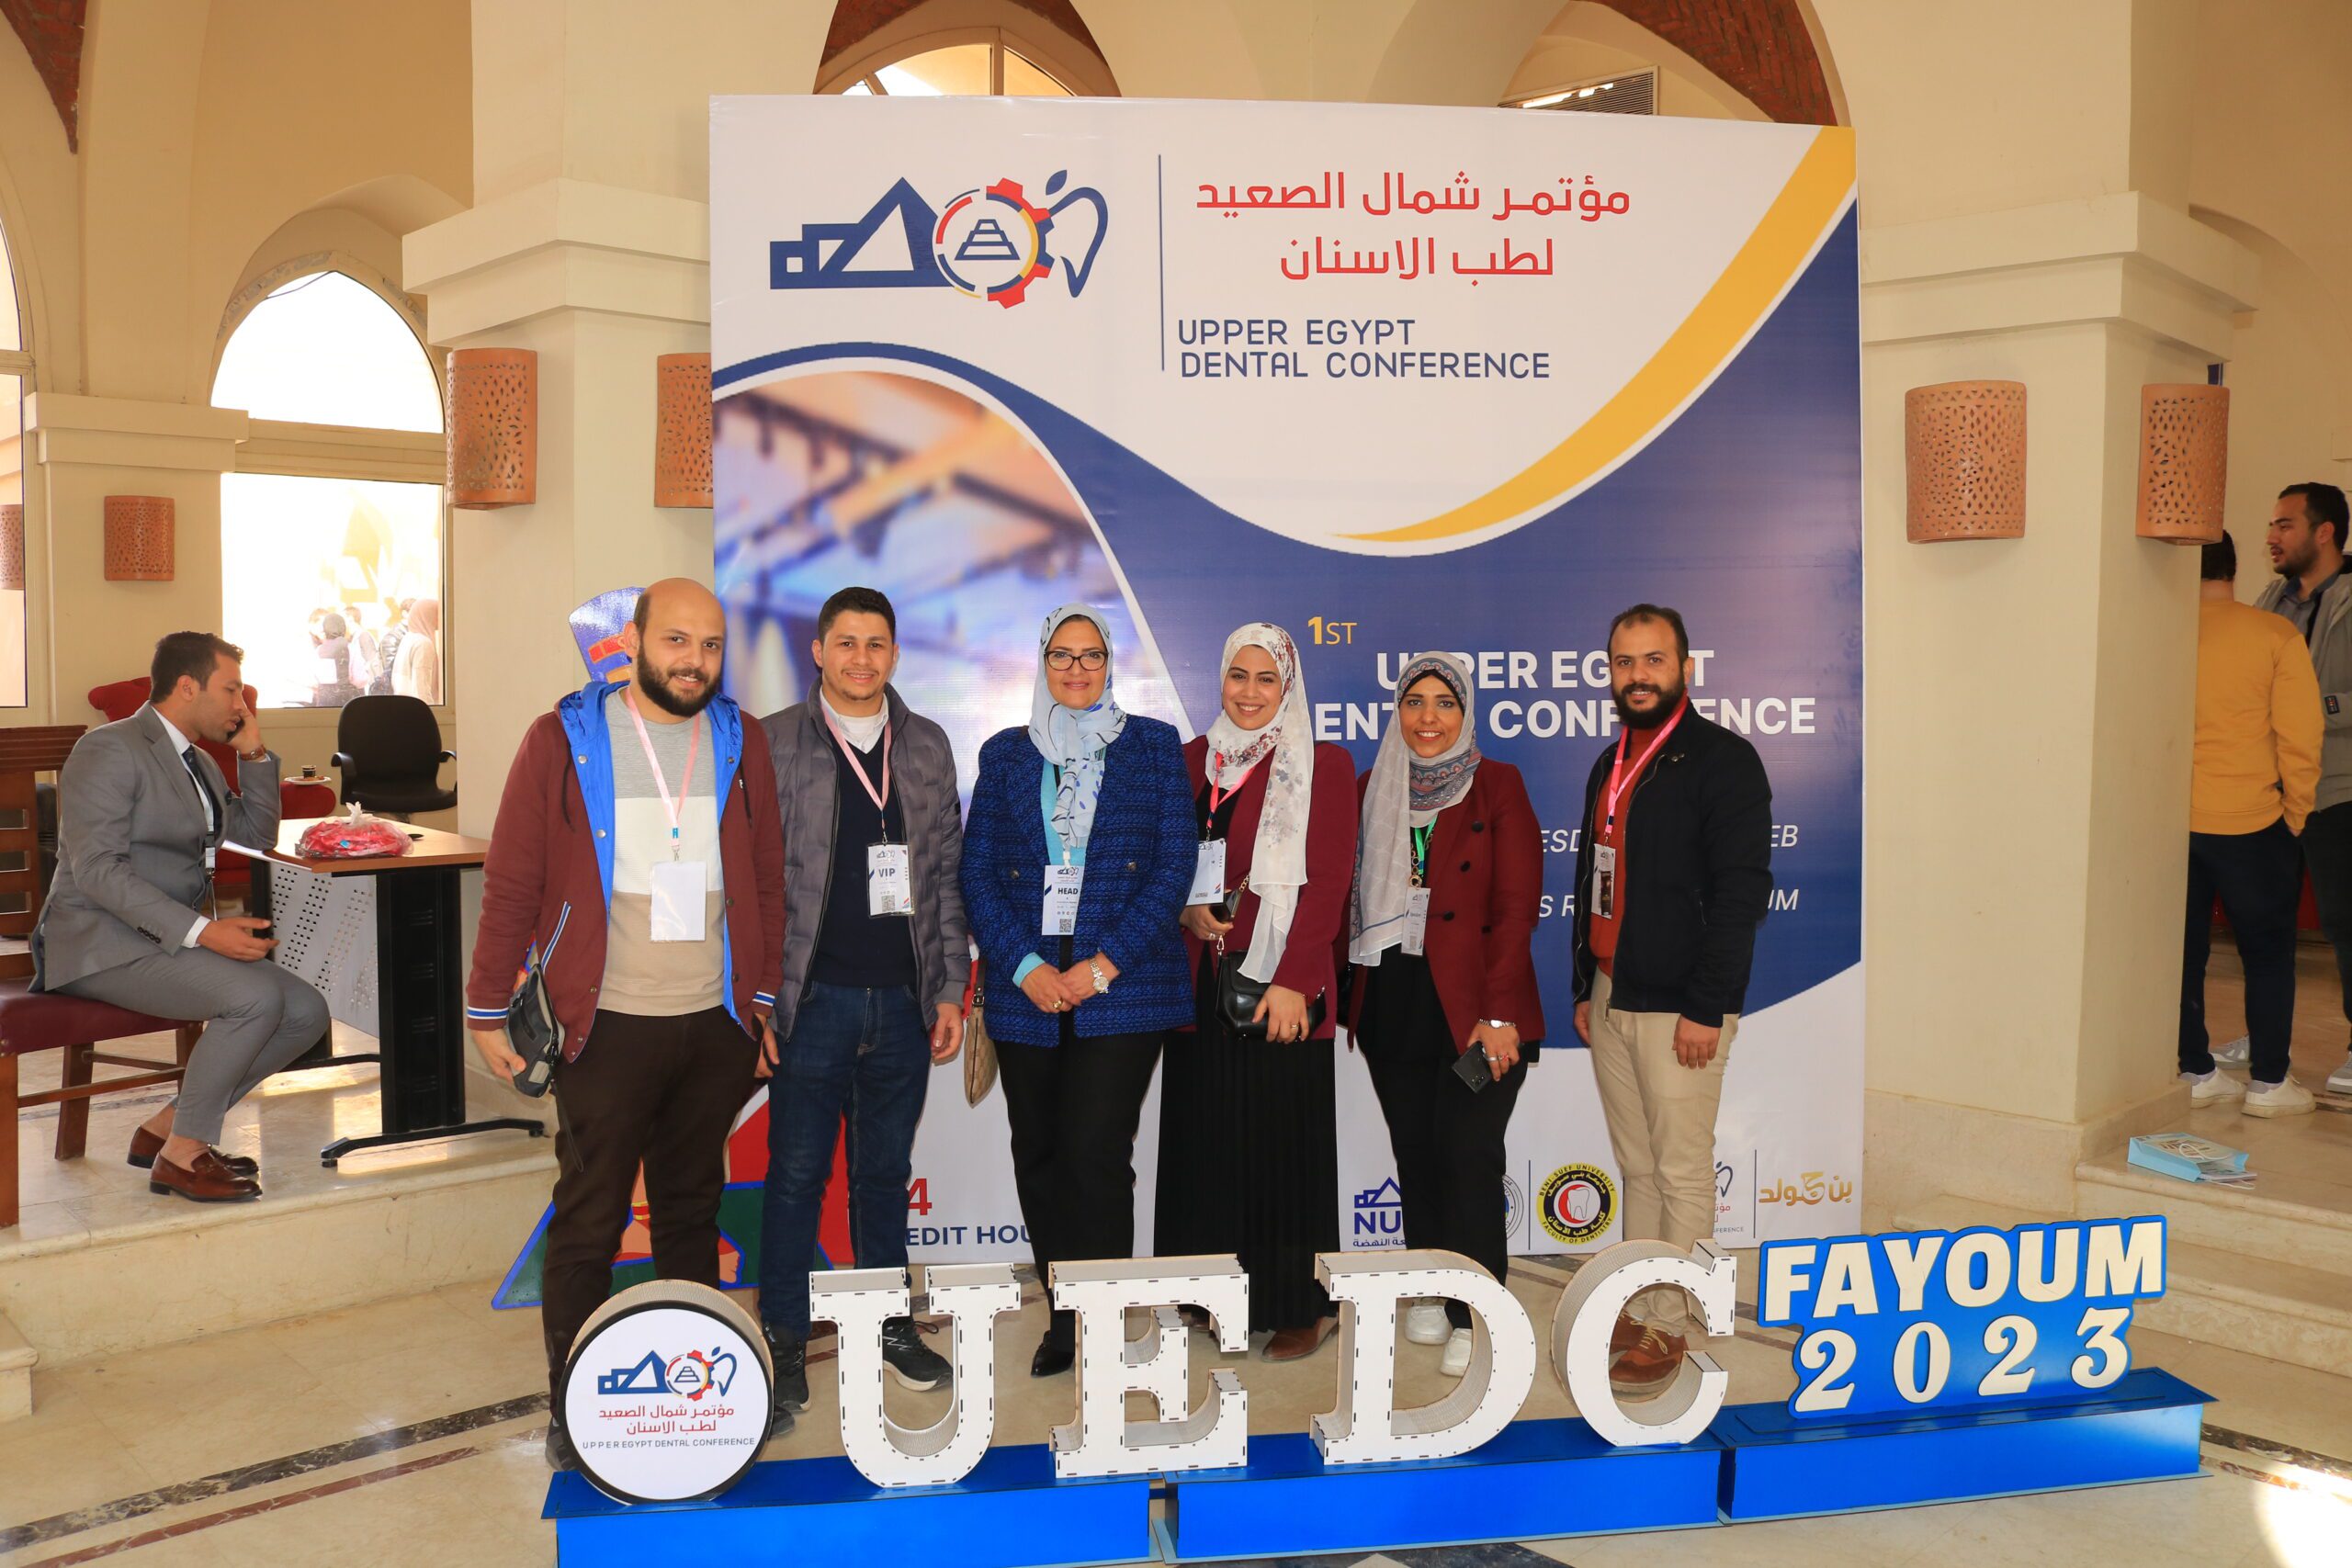 The First Upper Egypt Dental Conference was held with the participation of Nahda University, Beni Suef University, and Fayoum University